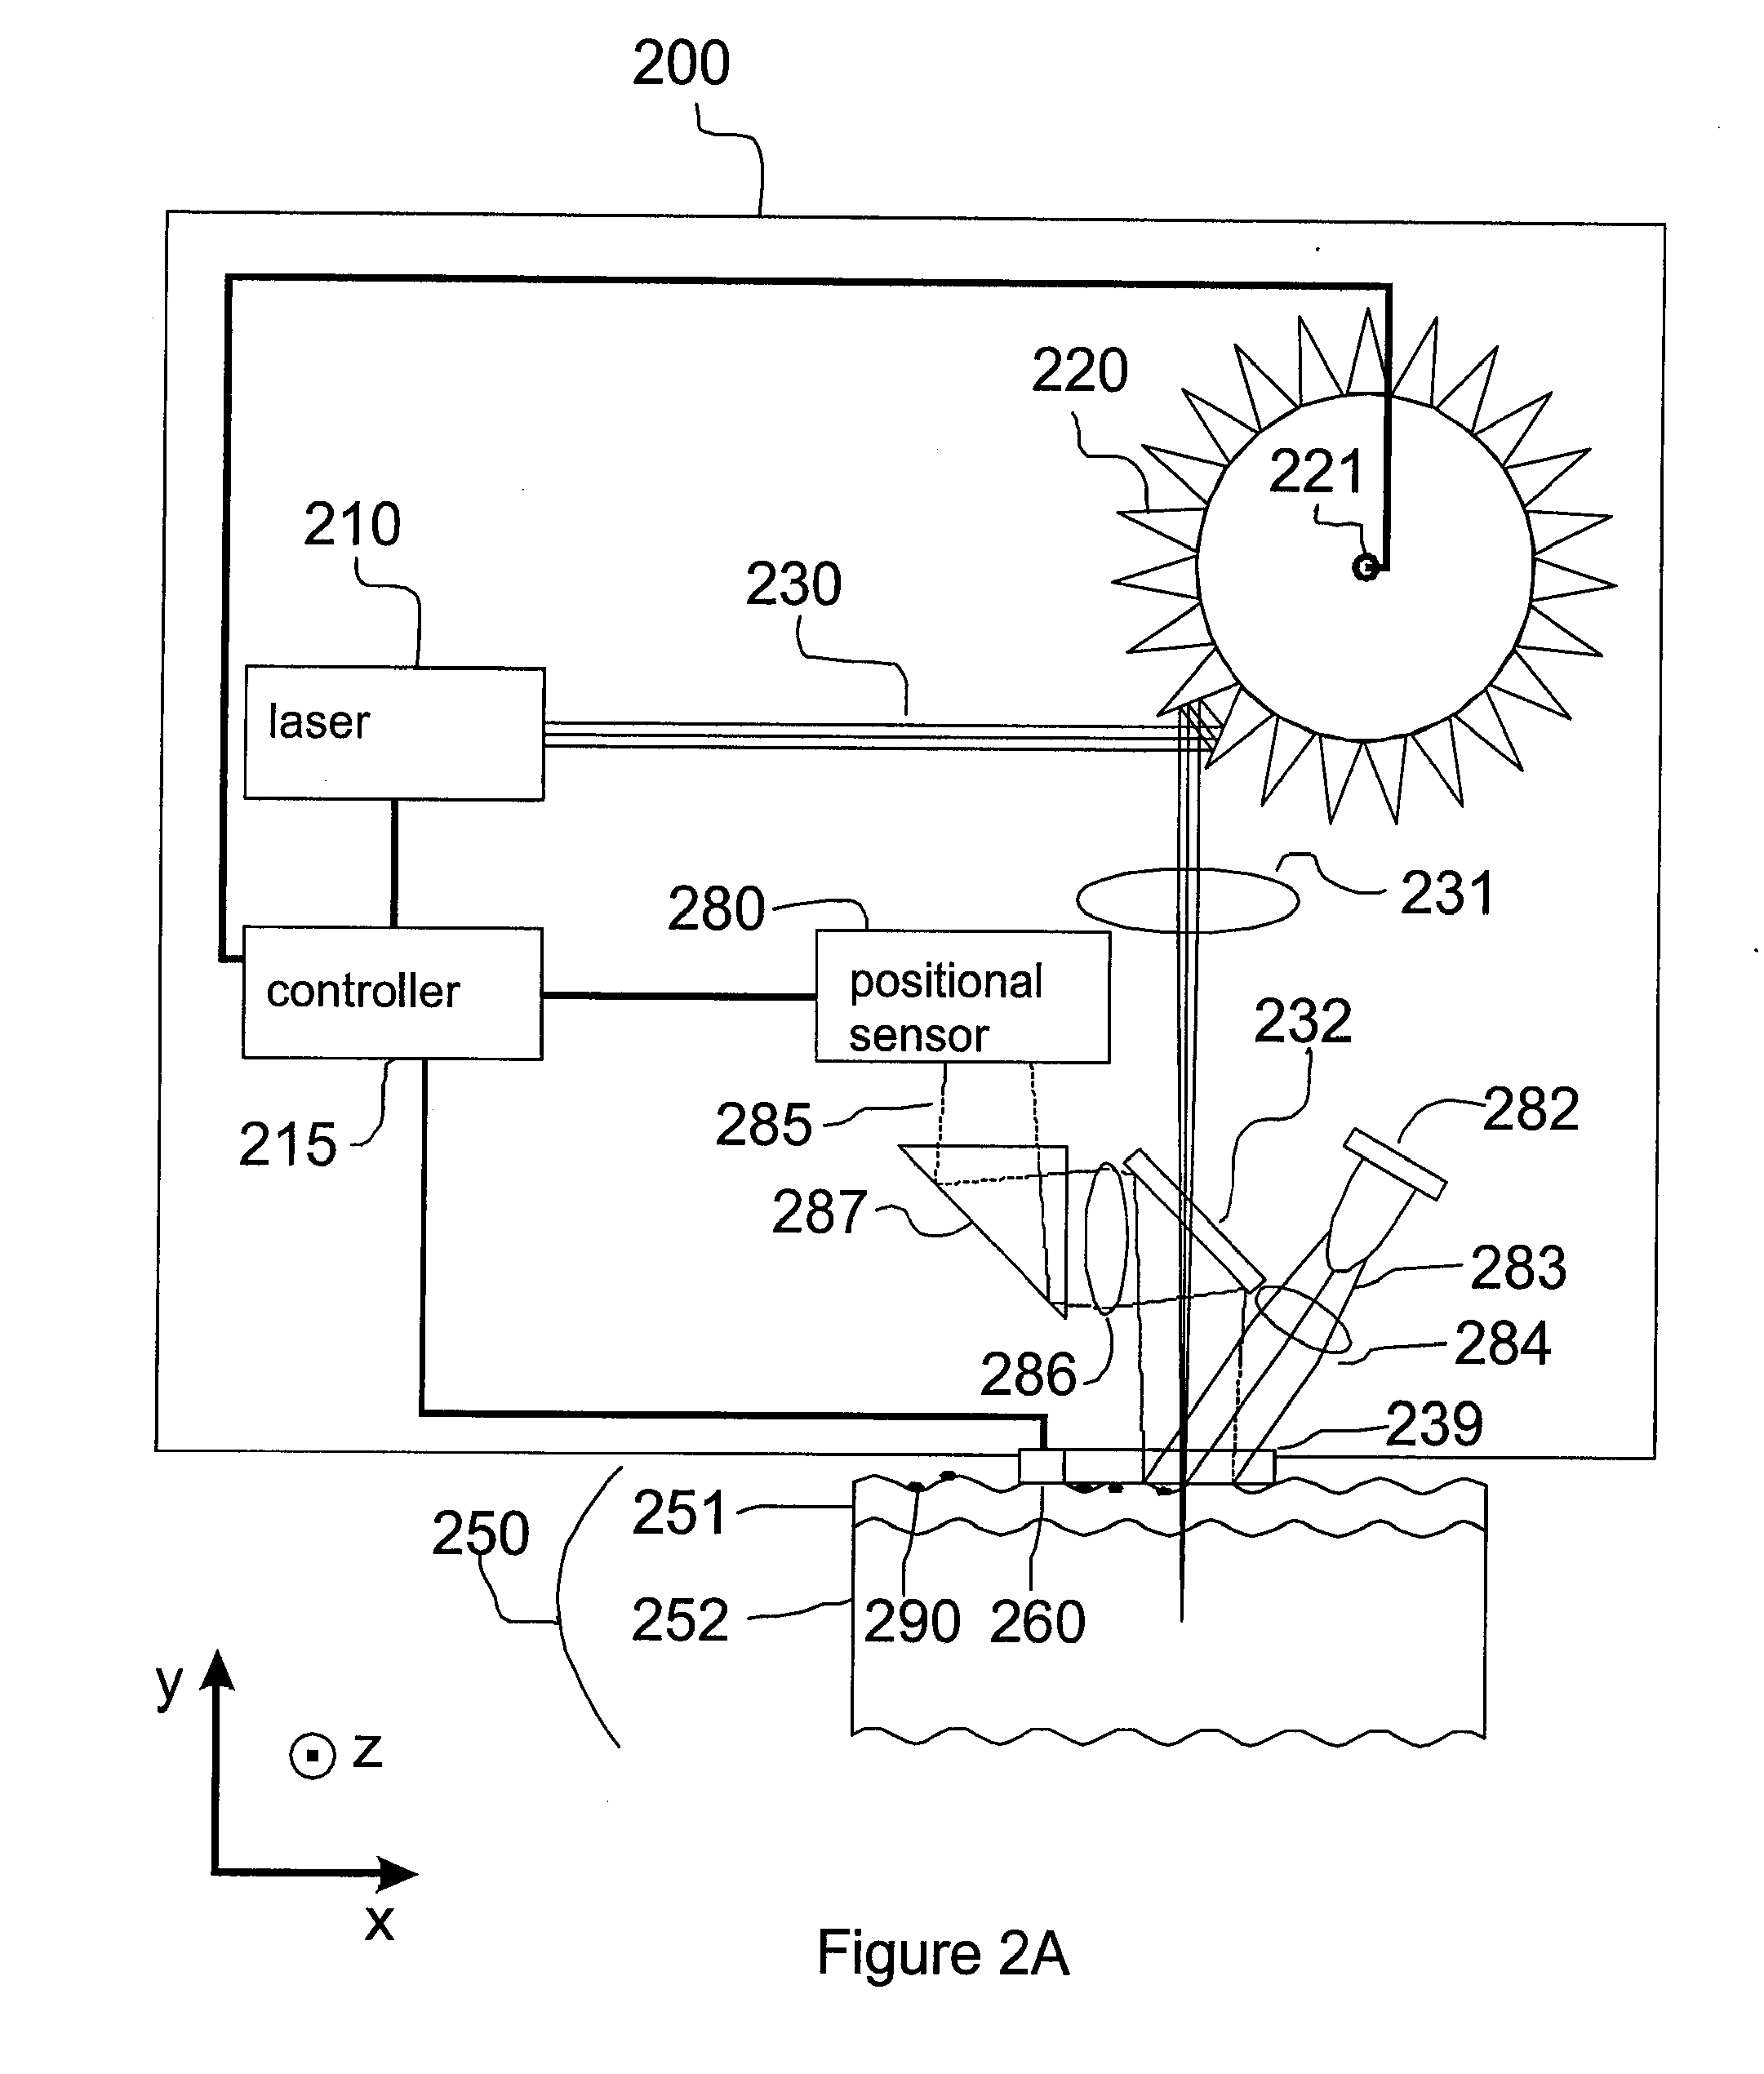 Method and Apparatus for Monitoring and Controlling Thermally Induced Tissue Treatment